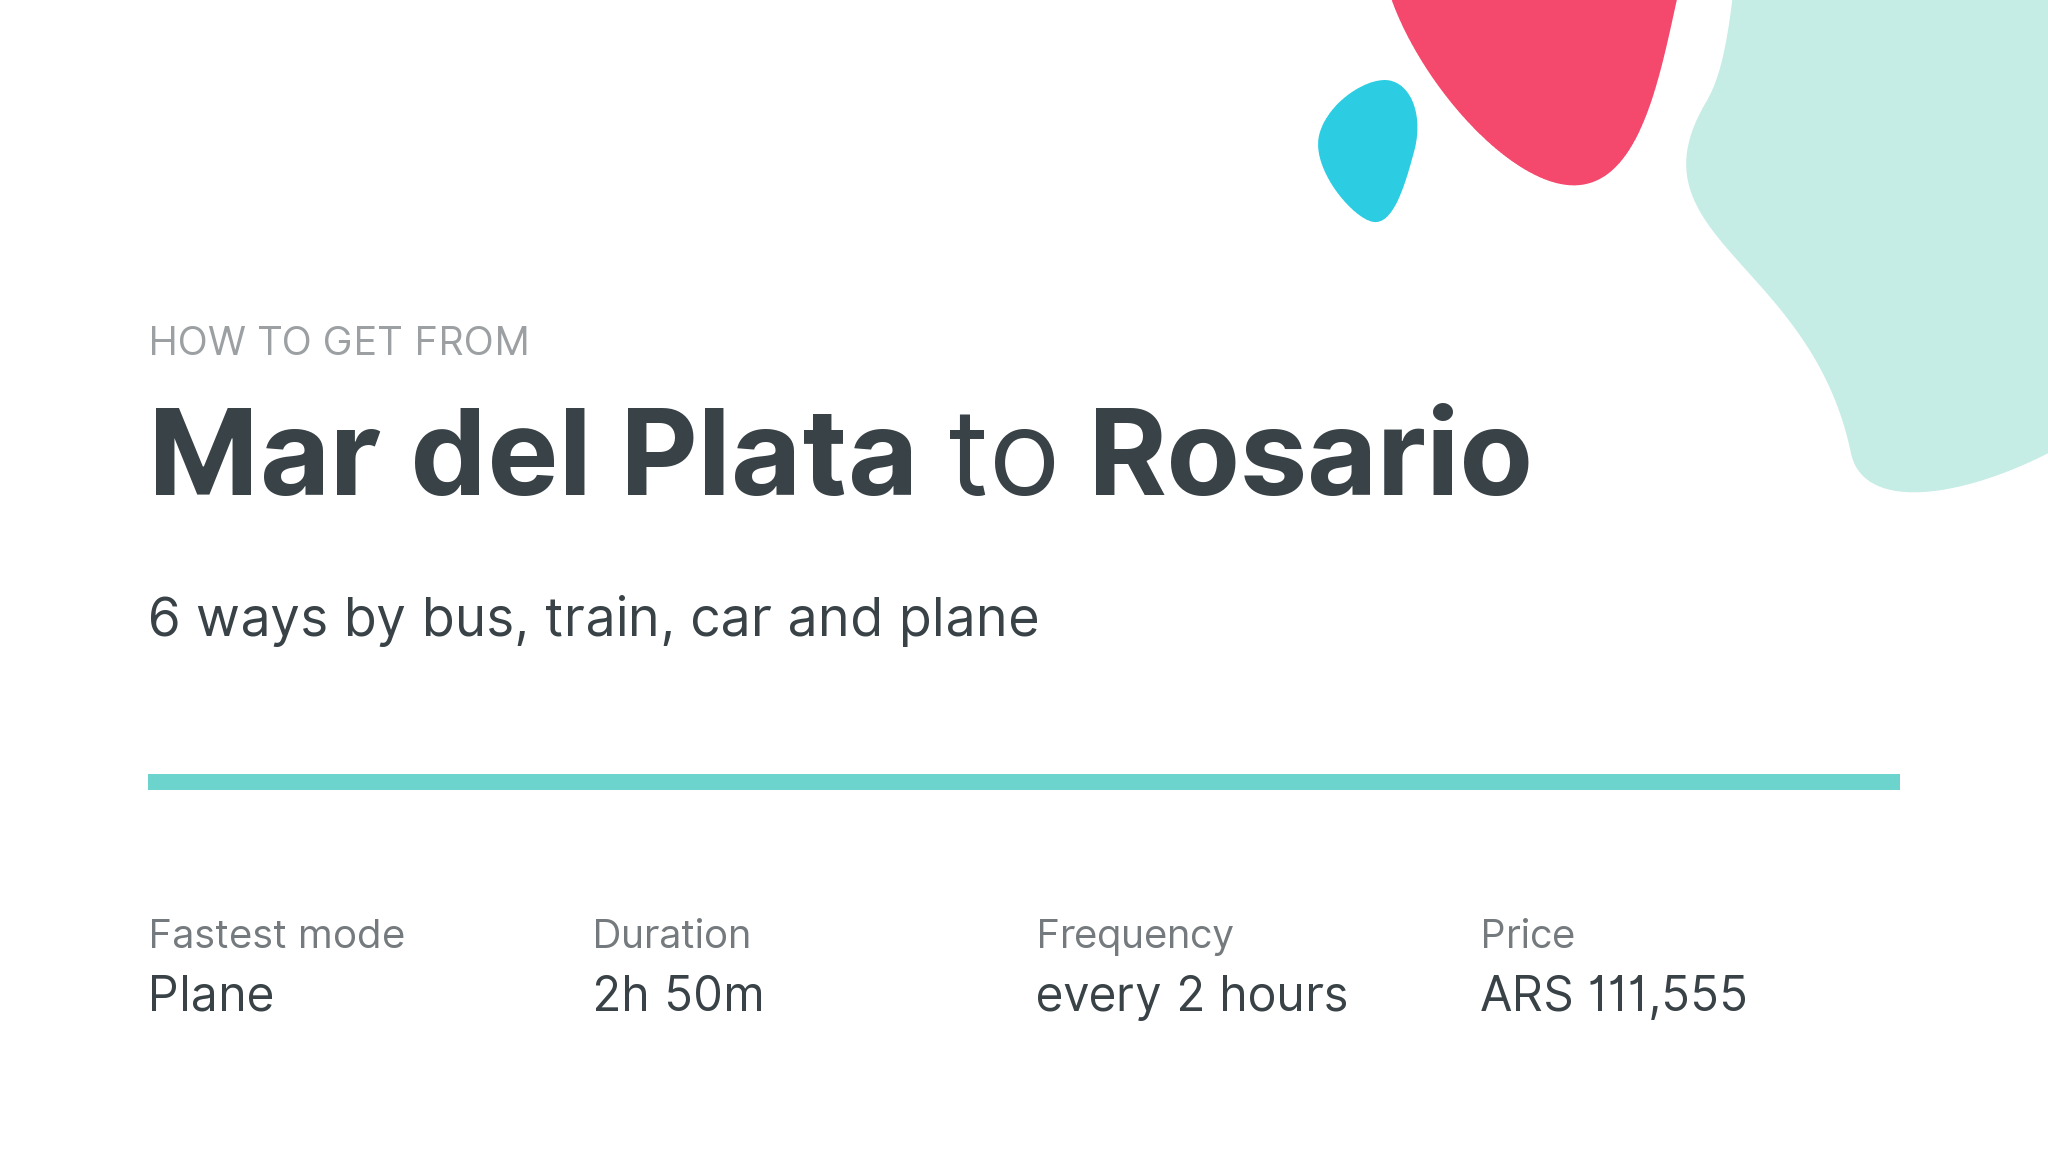 How do I get from Mar del Plata to Rosario